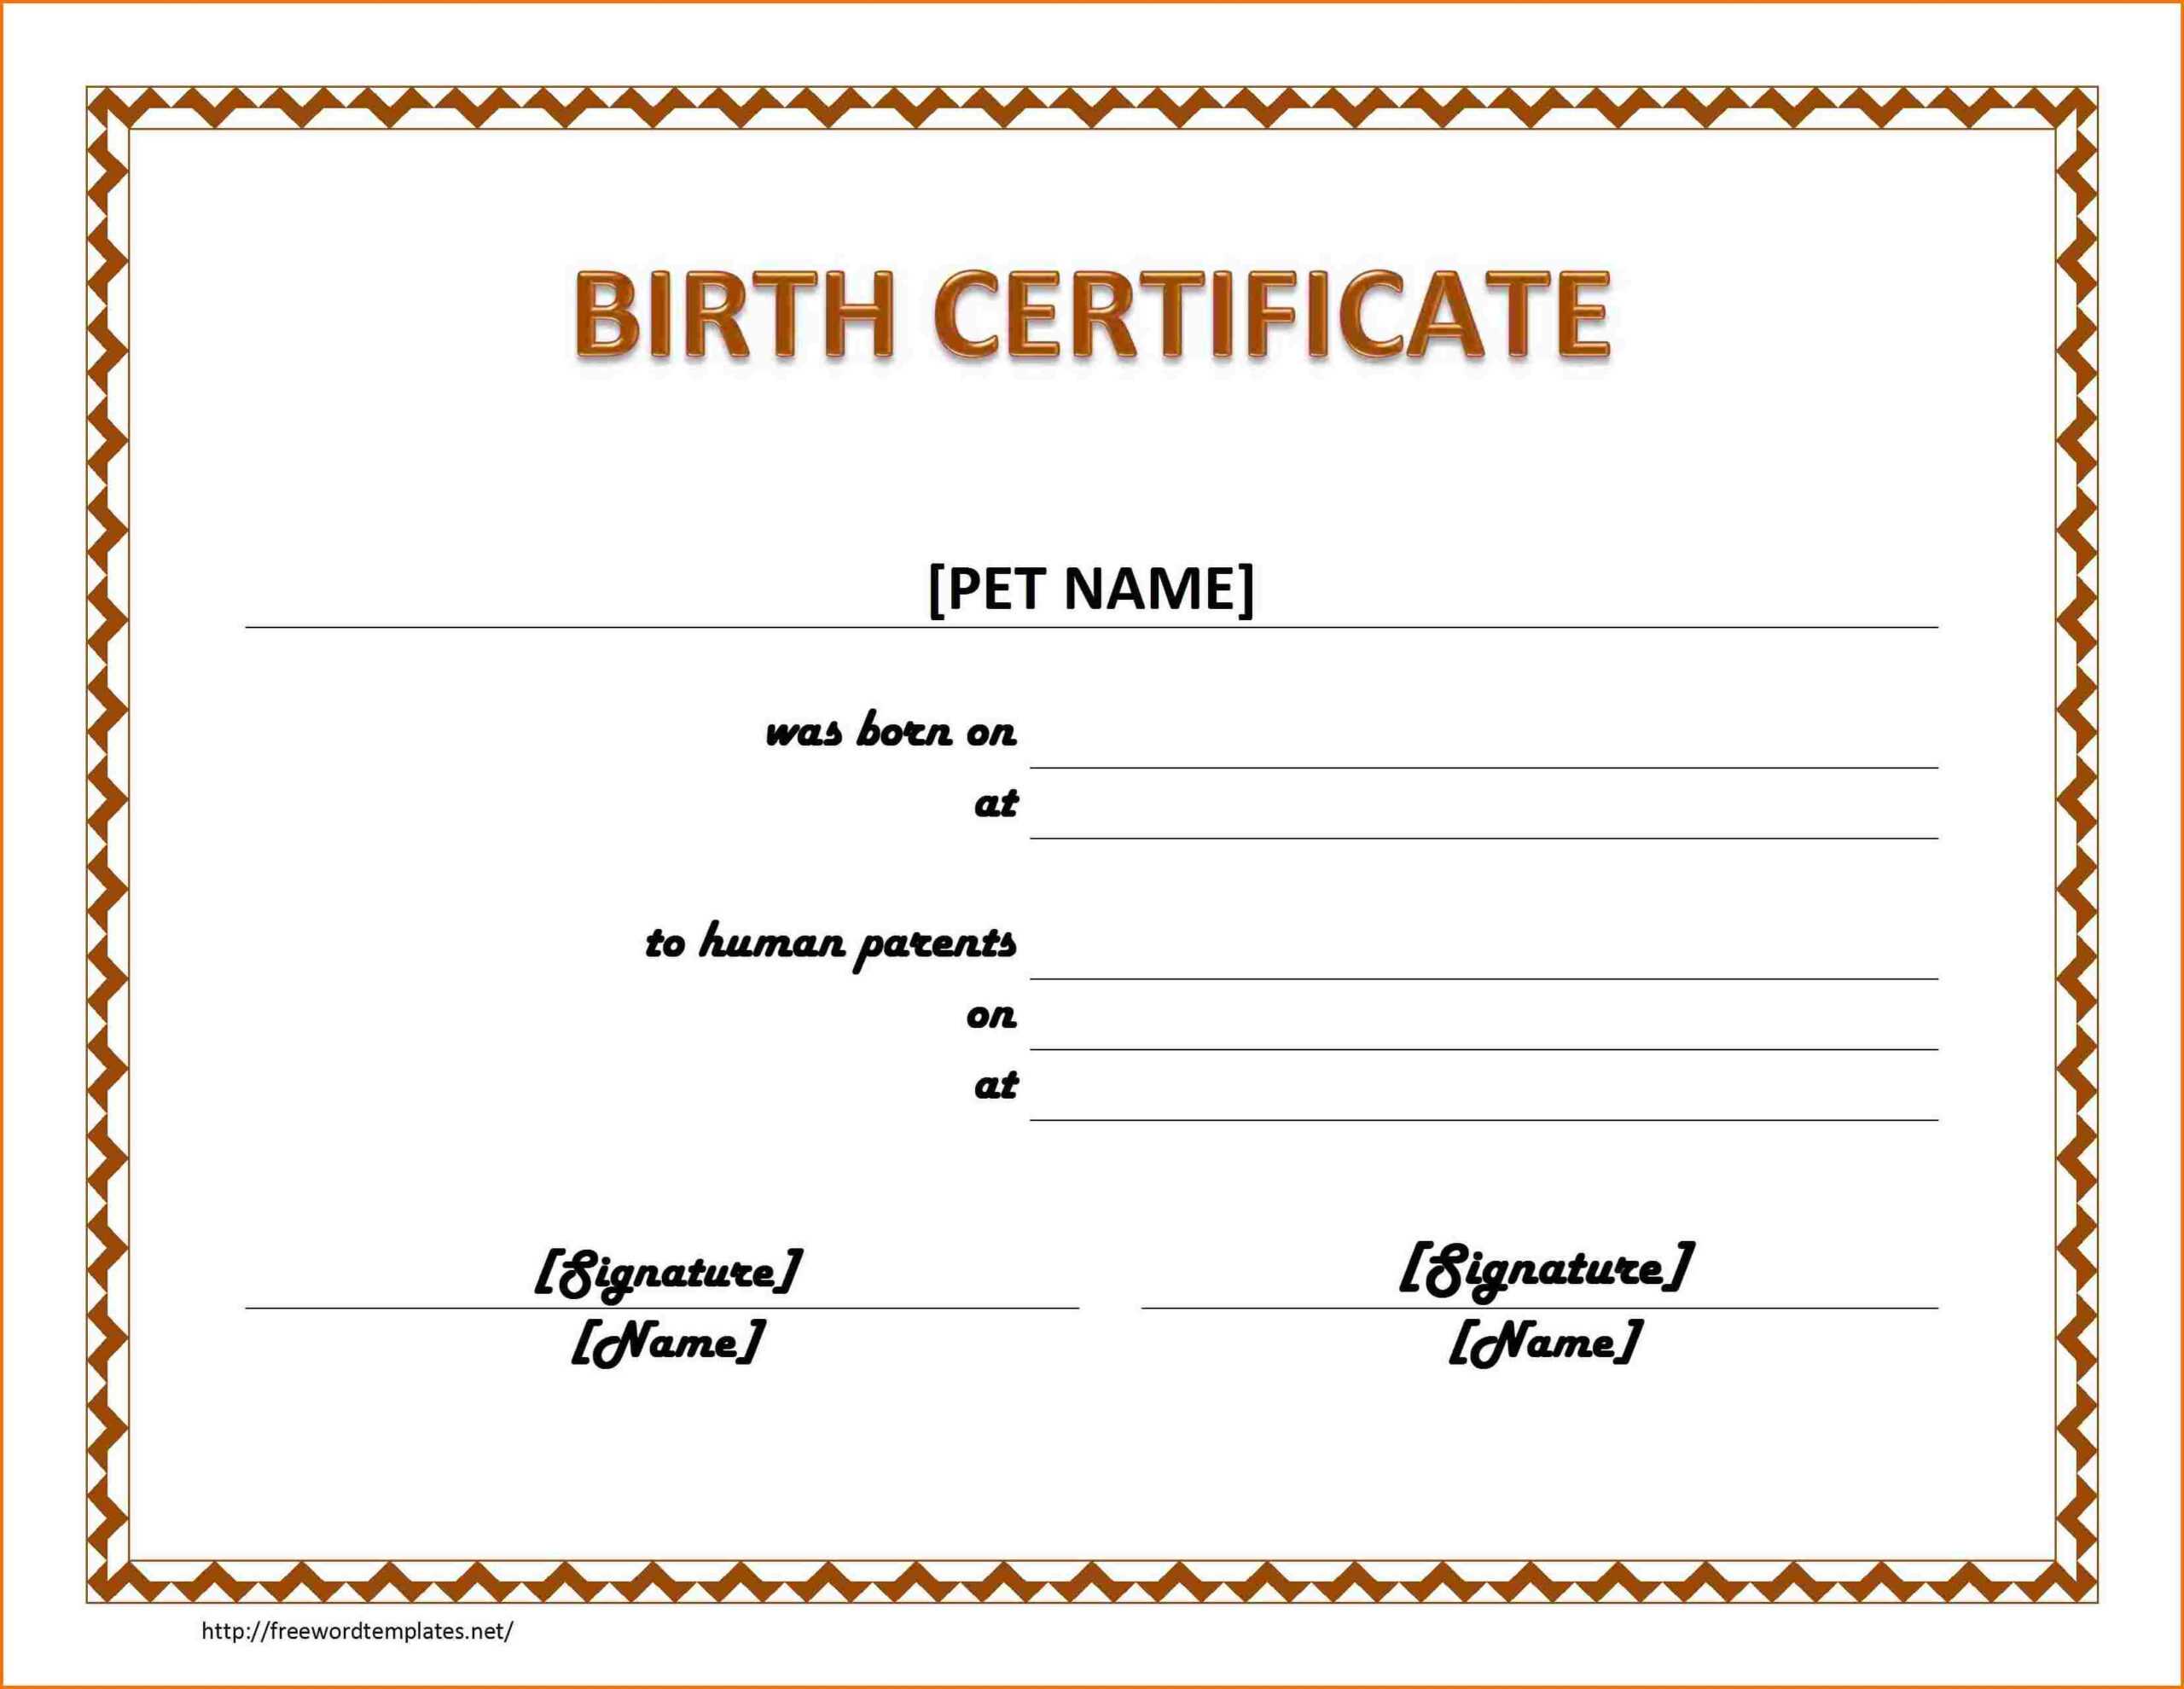 Birth Certificate Template Word | Authorization Letter Pdf Within Certificate Of Authorization Template